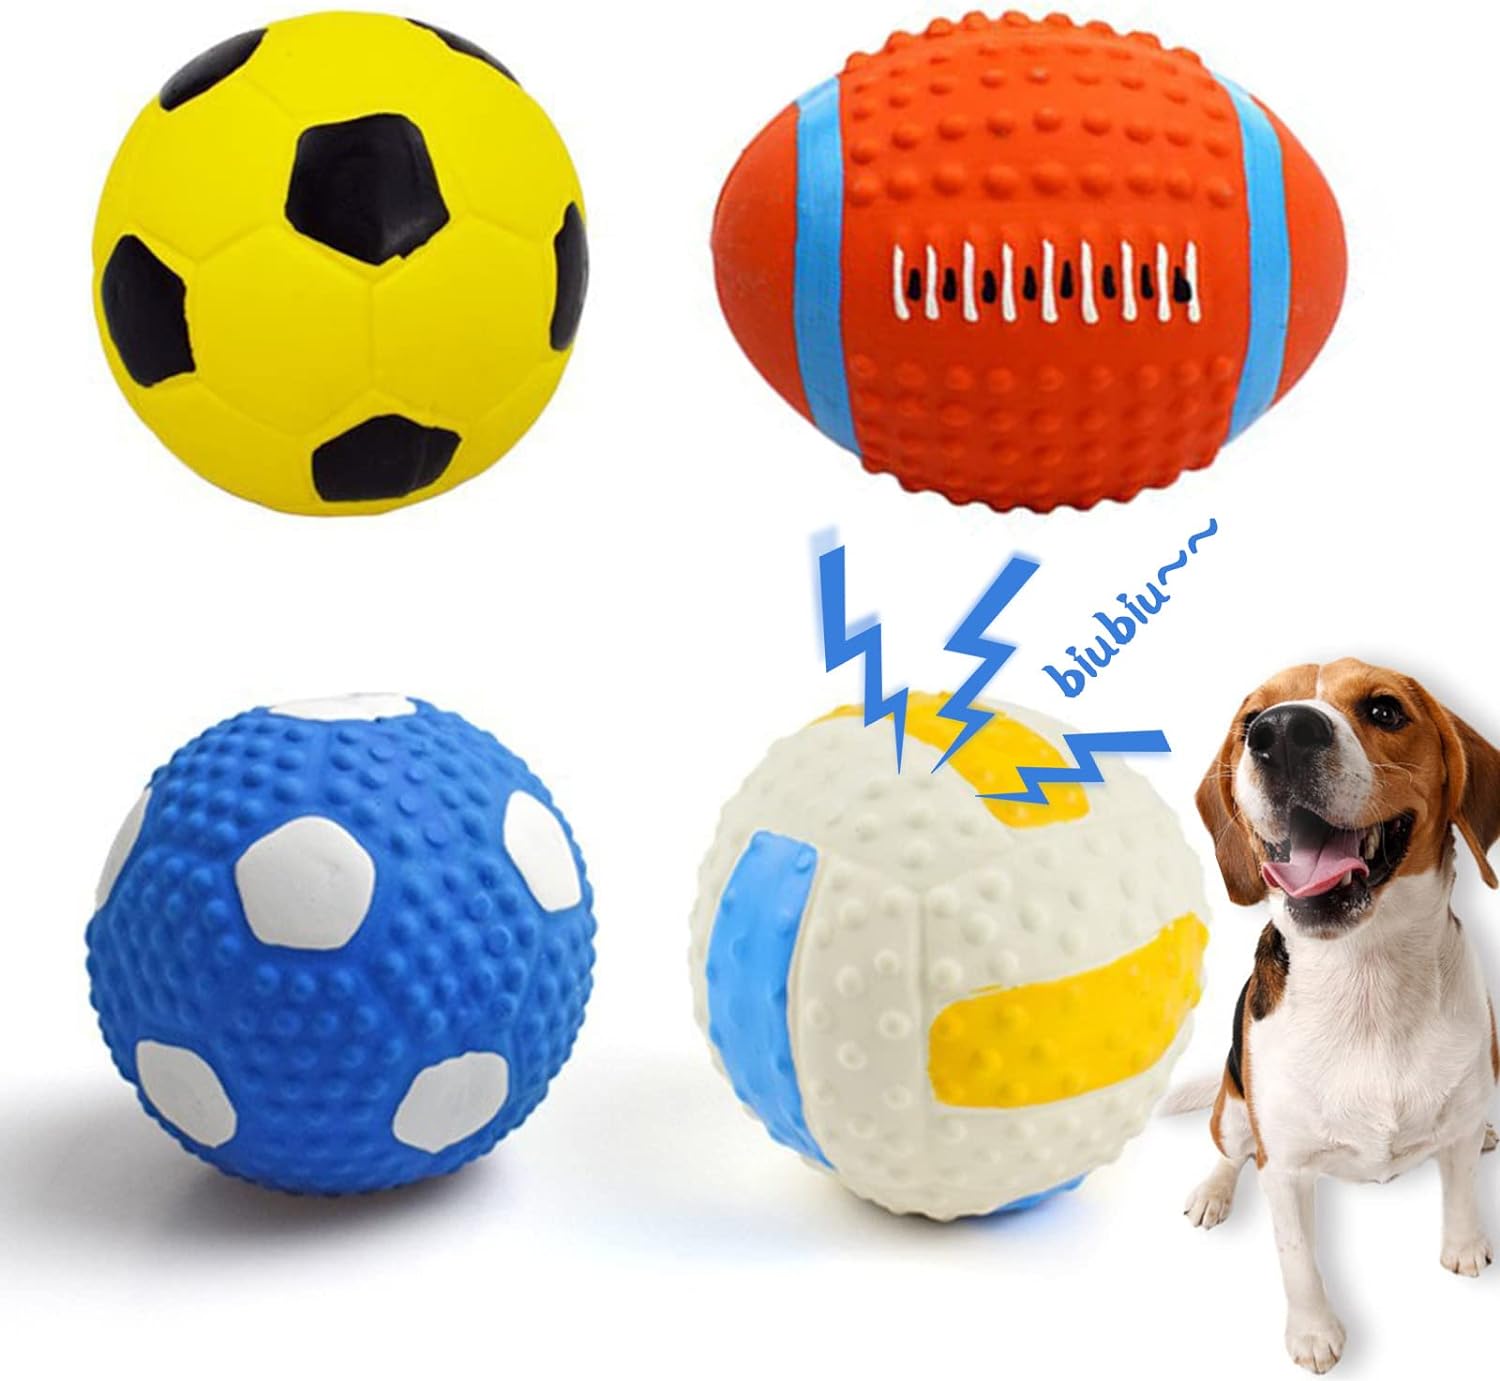 Crinkle Play Ball Dog Toy - M